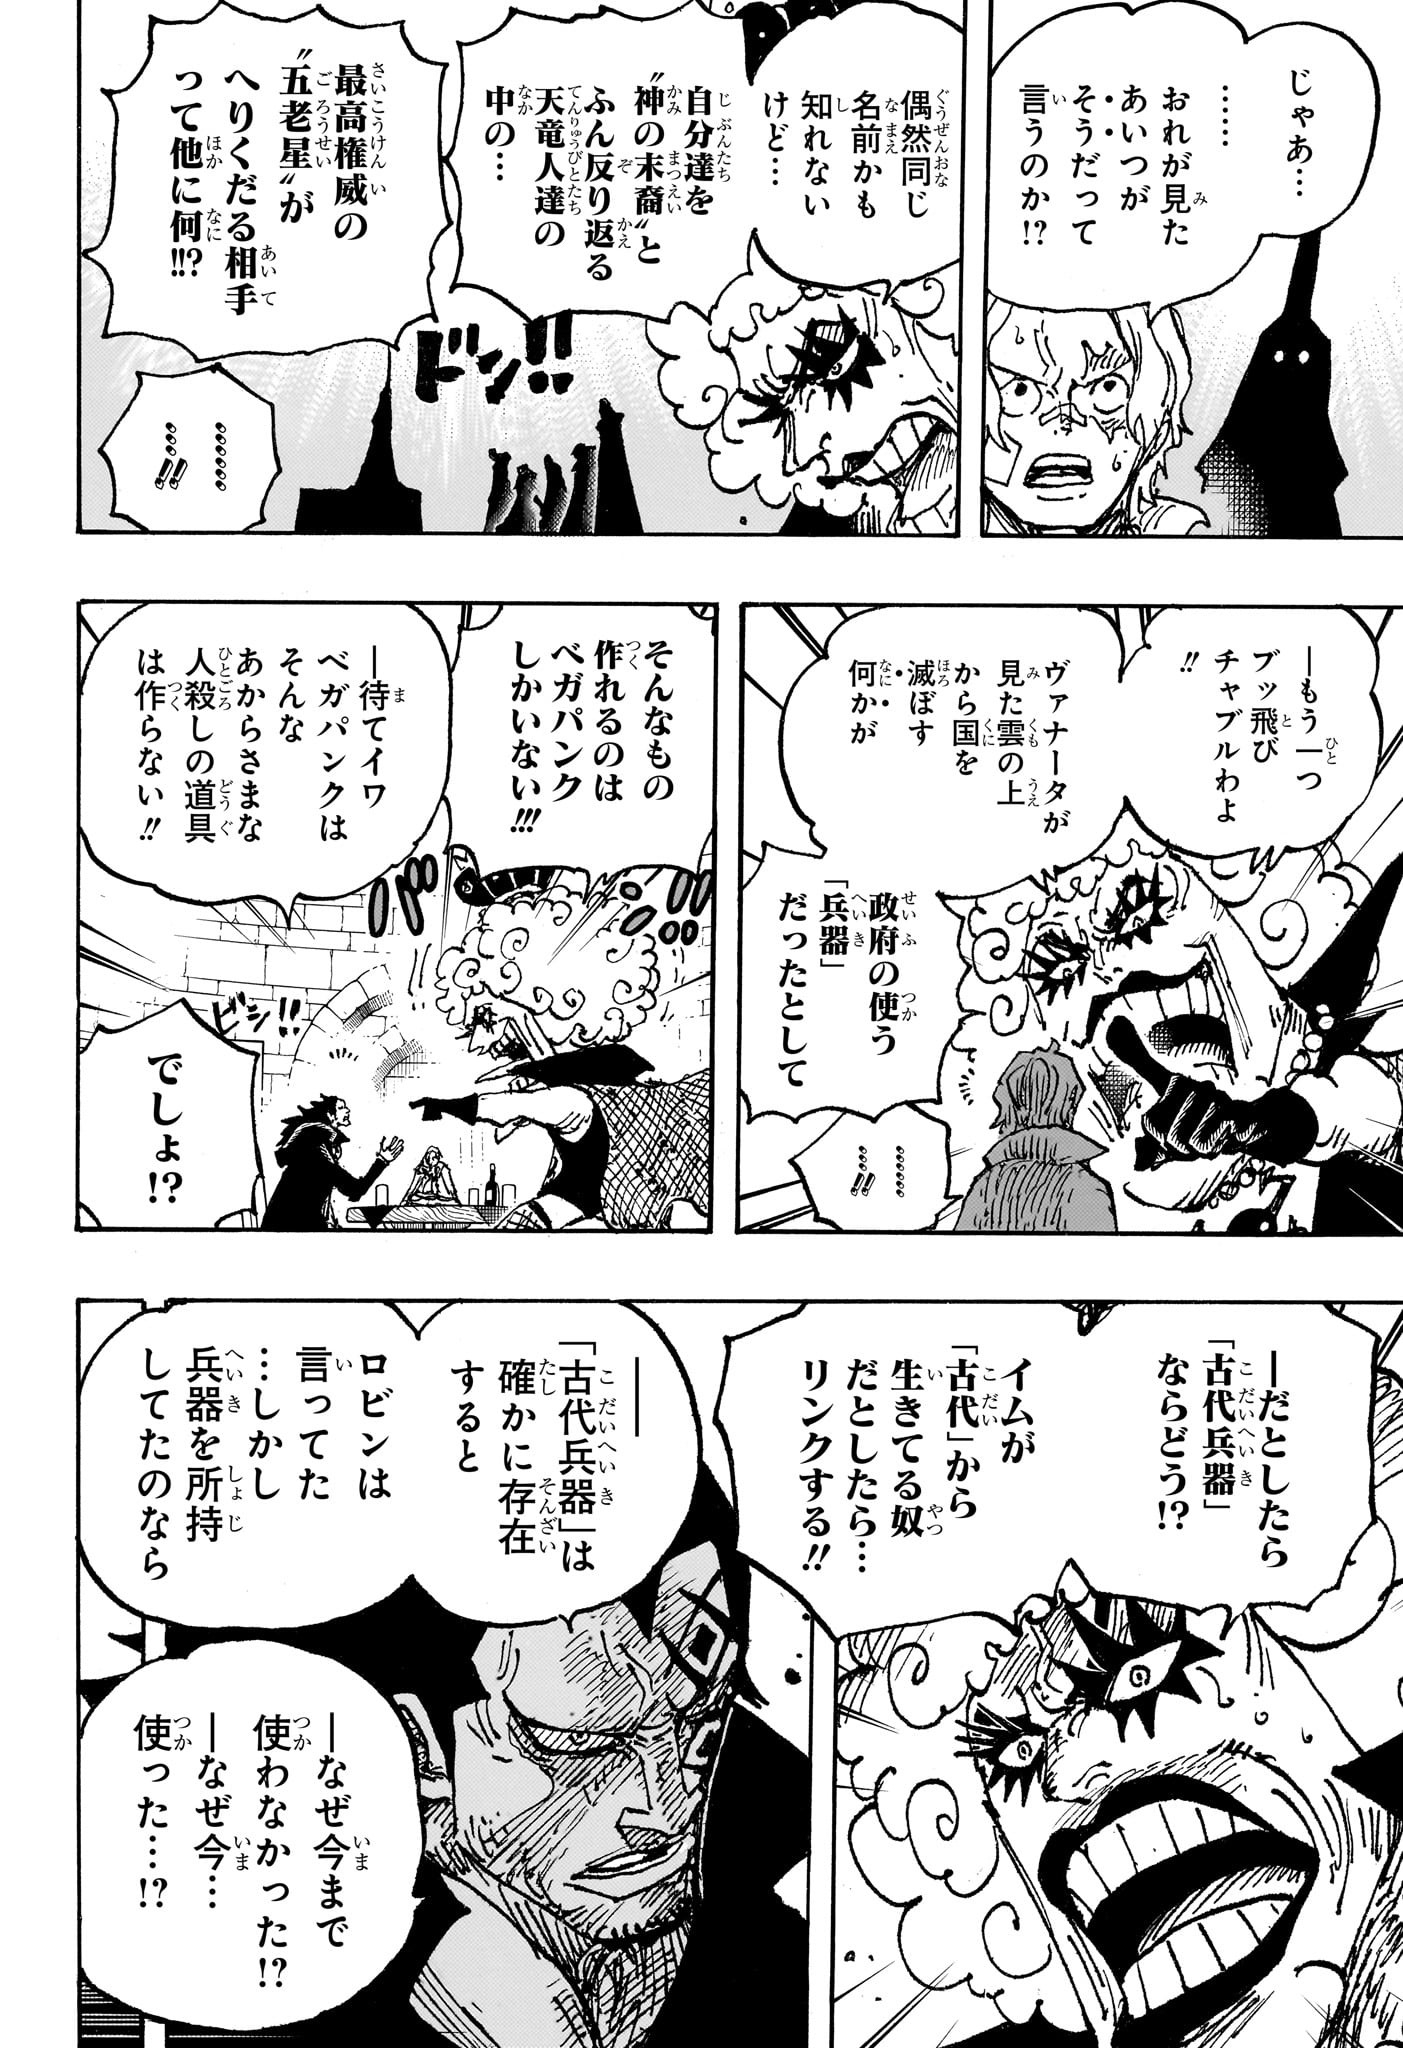 One Piece - Chapter 1086 - Page 14